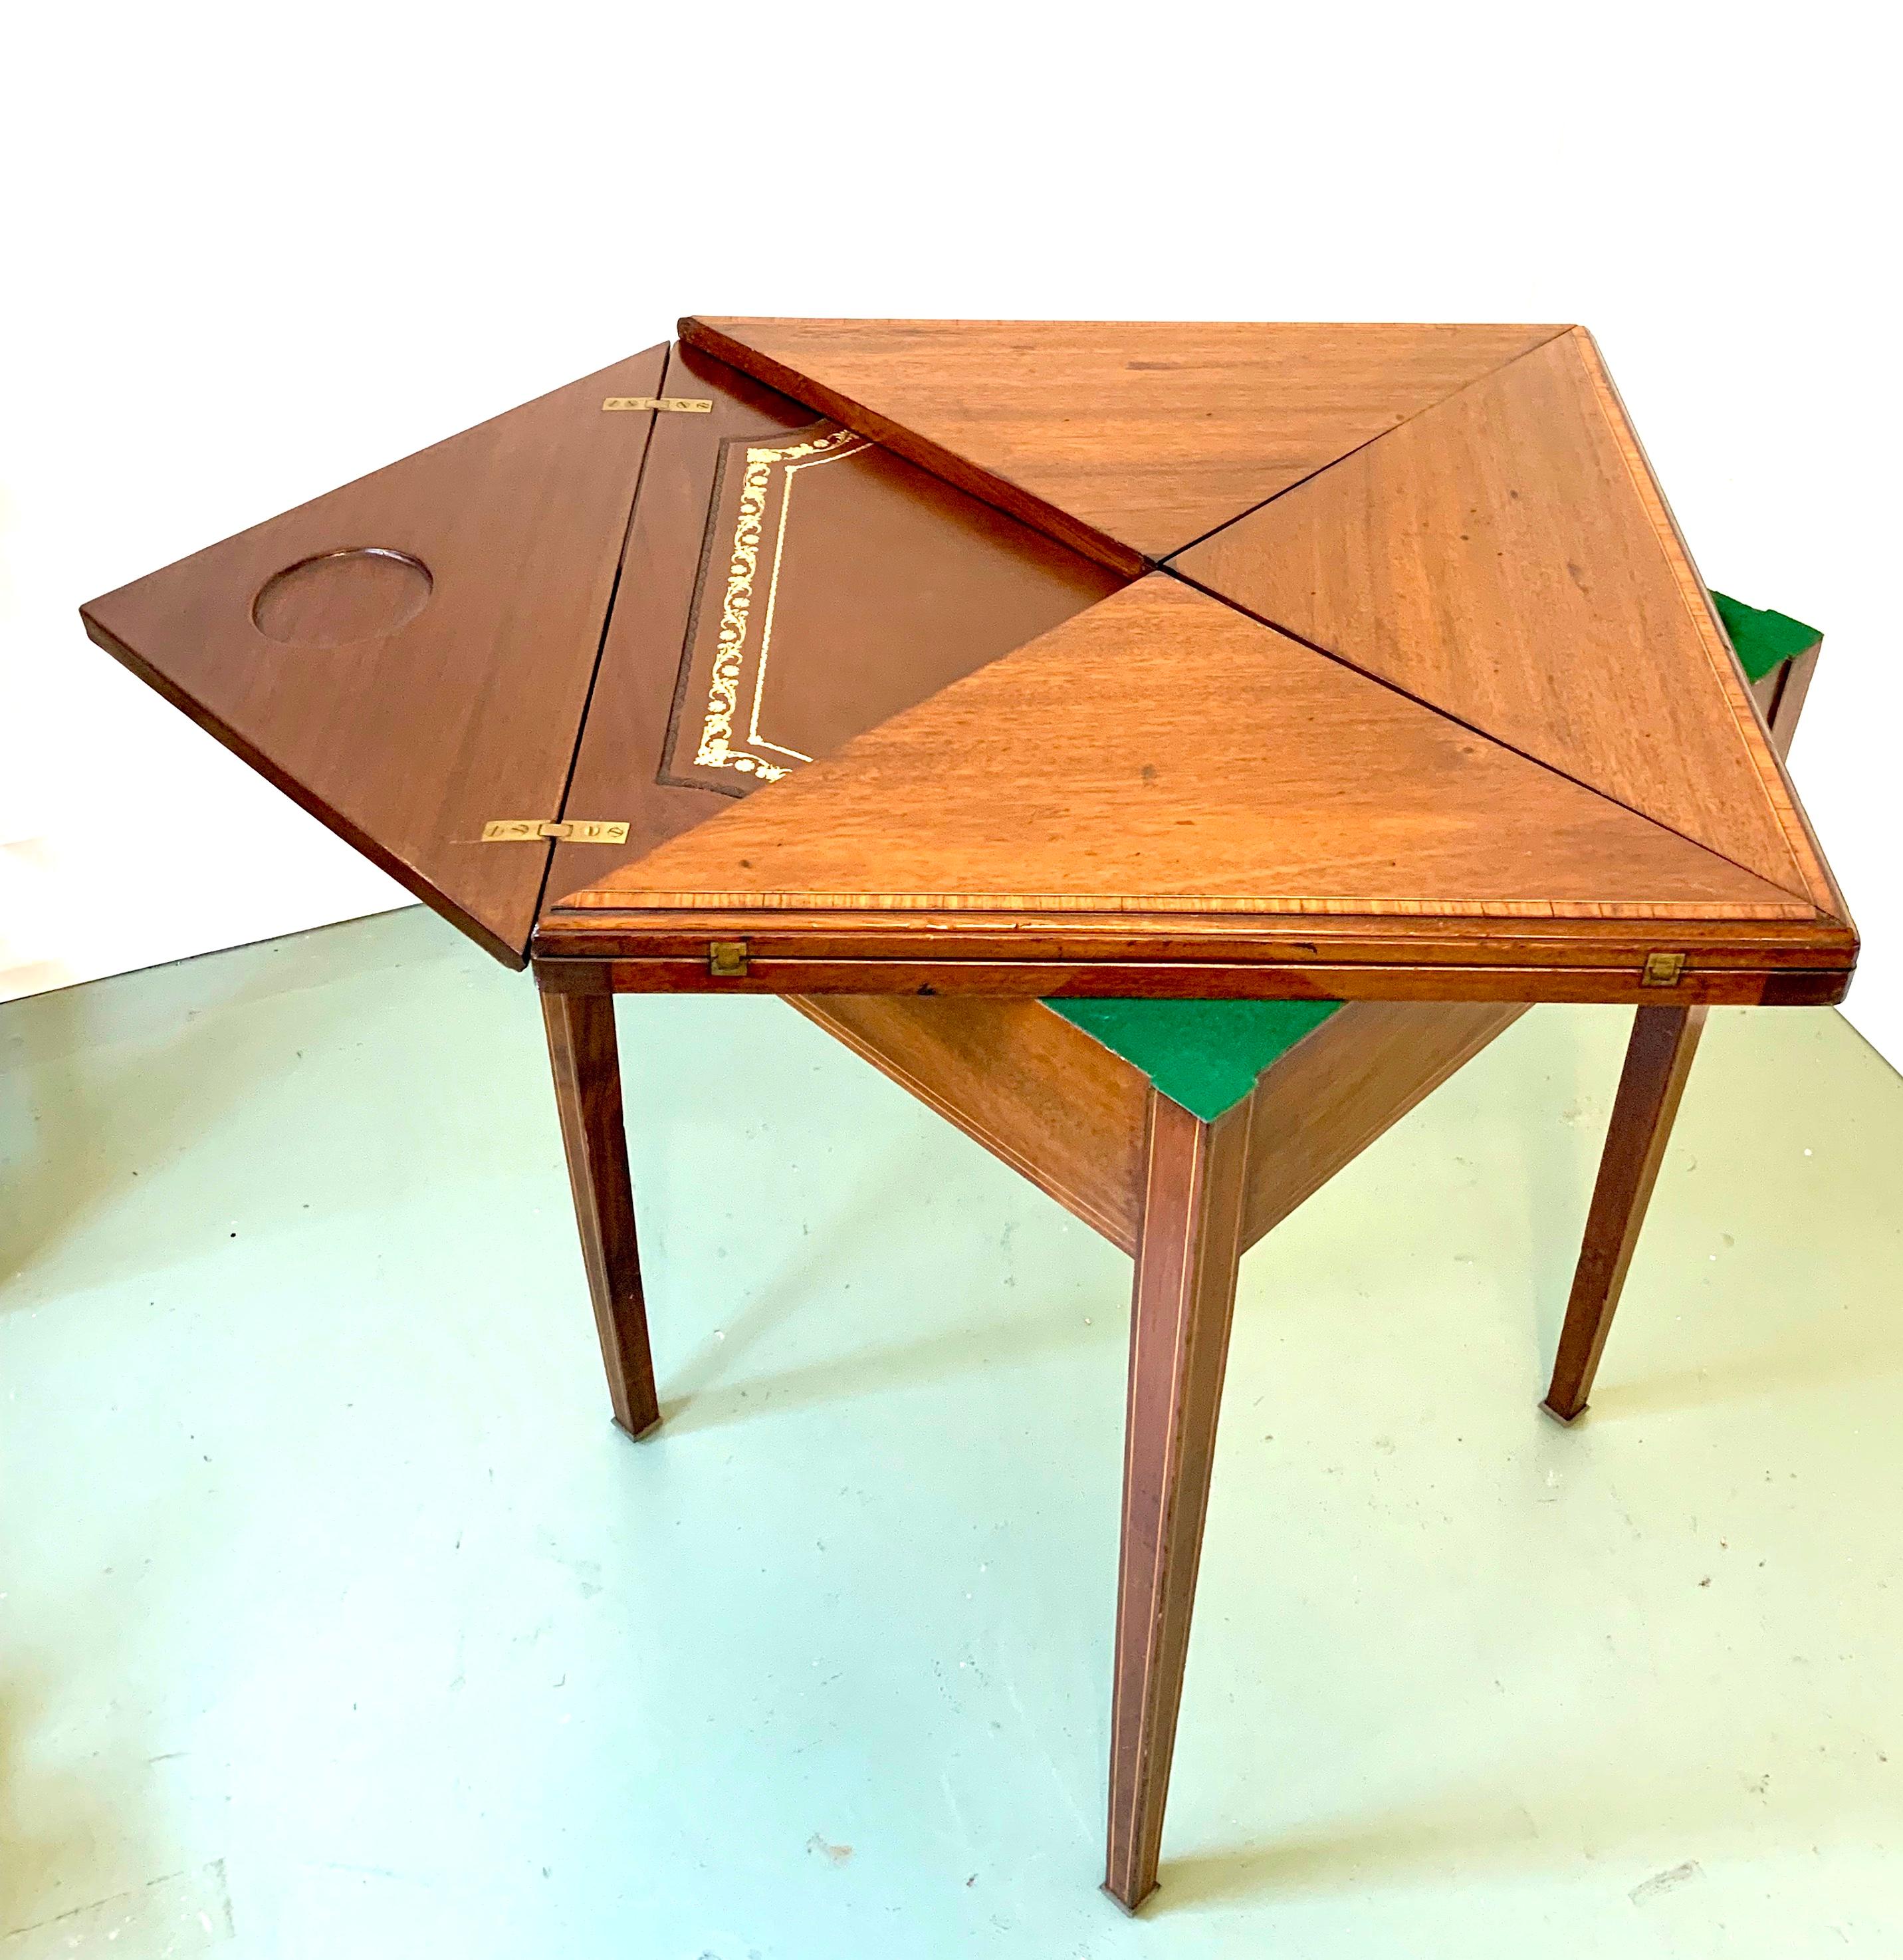 Edwardian 19th Century Unique Wooden Card Table with Envelope Top For Sale